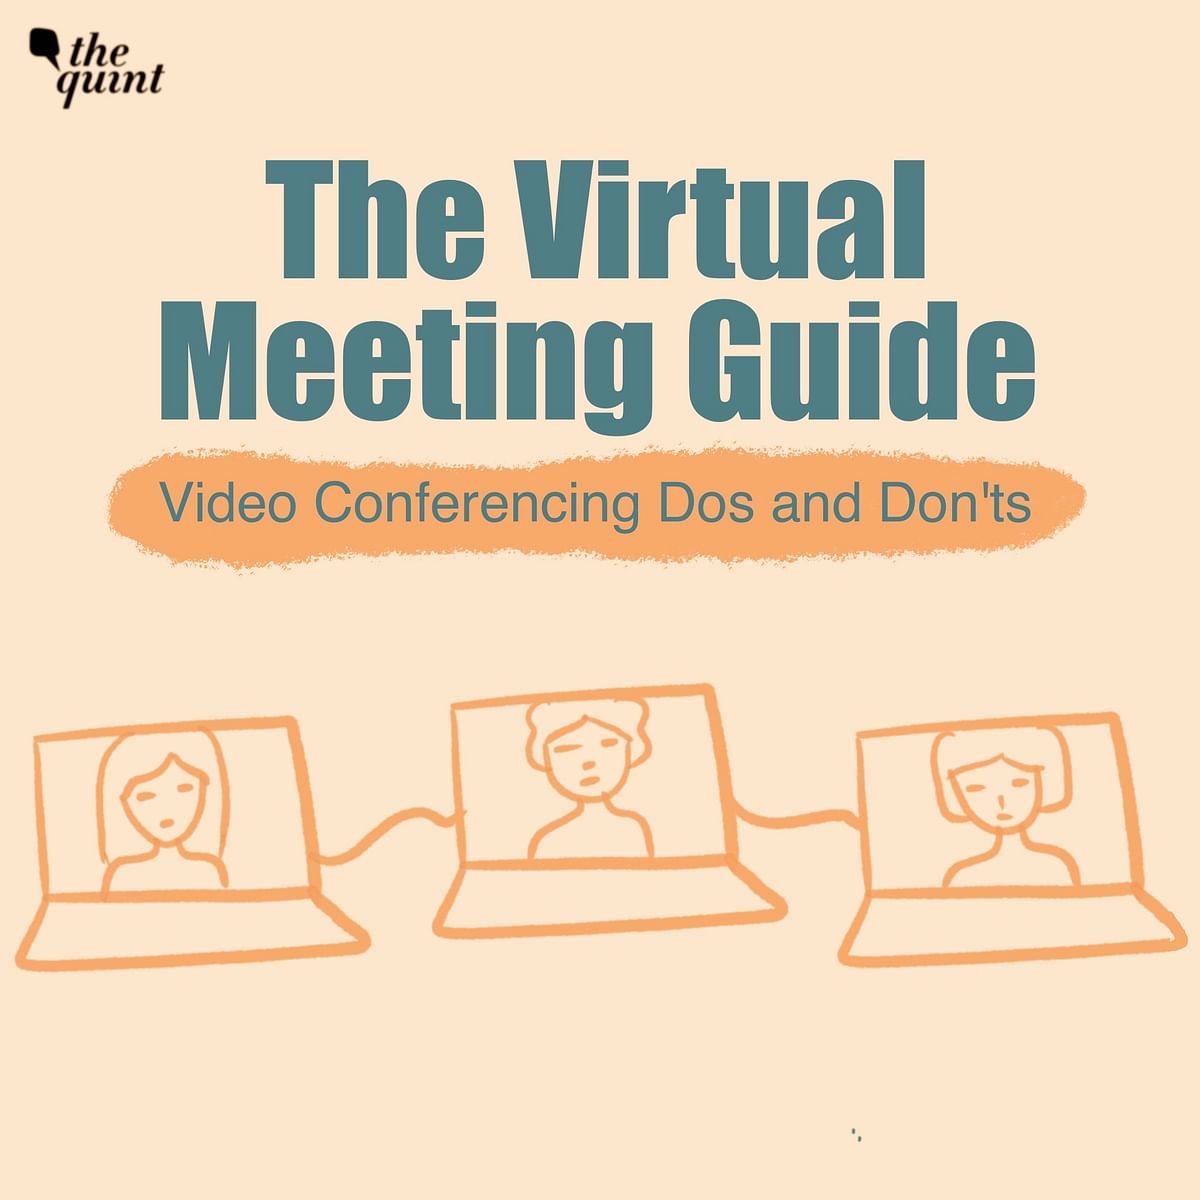 Video Conferencing has become the new normal. Here are some handy tips to navigate virtual meetings successfully.